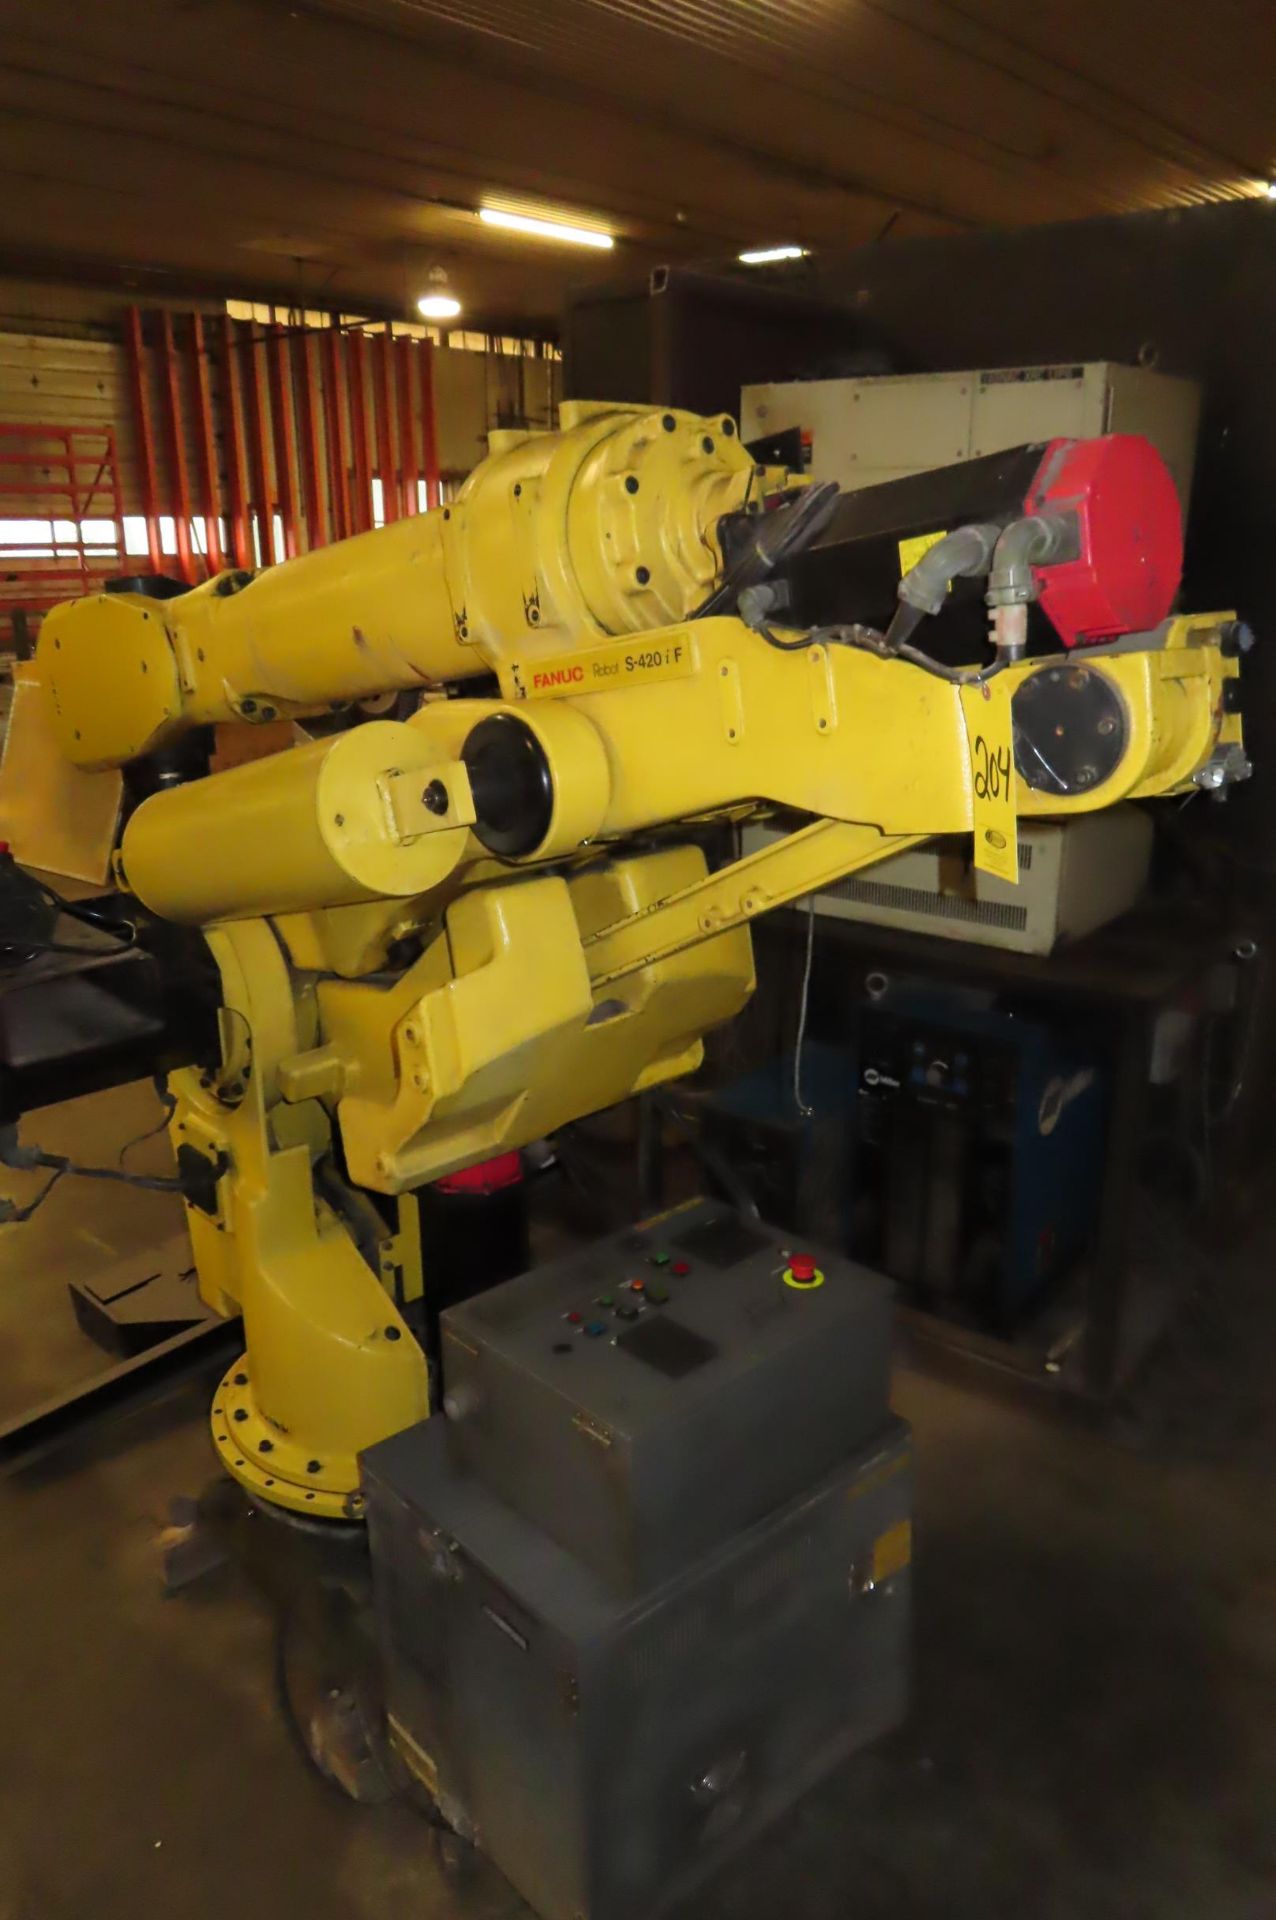 FANUC S-420IF WELDING ROBOT WITH SYSTEM R-J2 CONTROL AND PENDANT